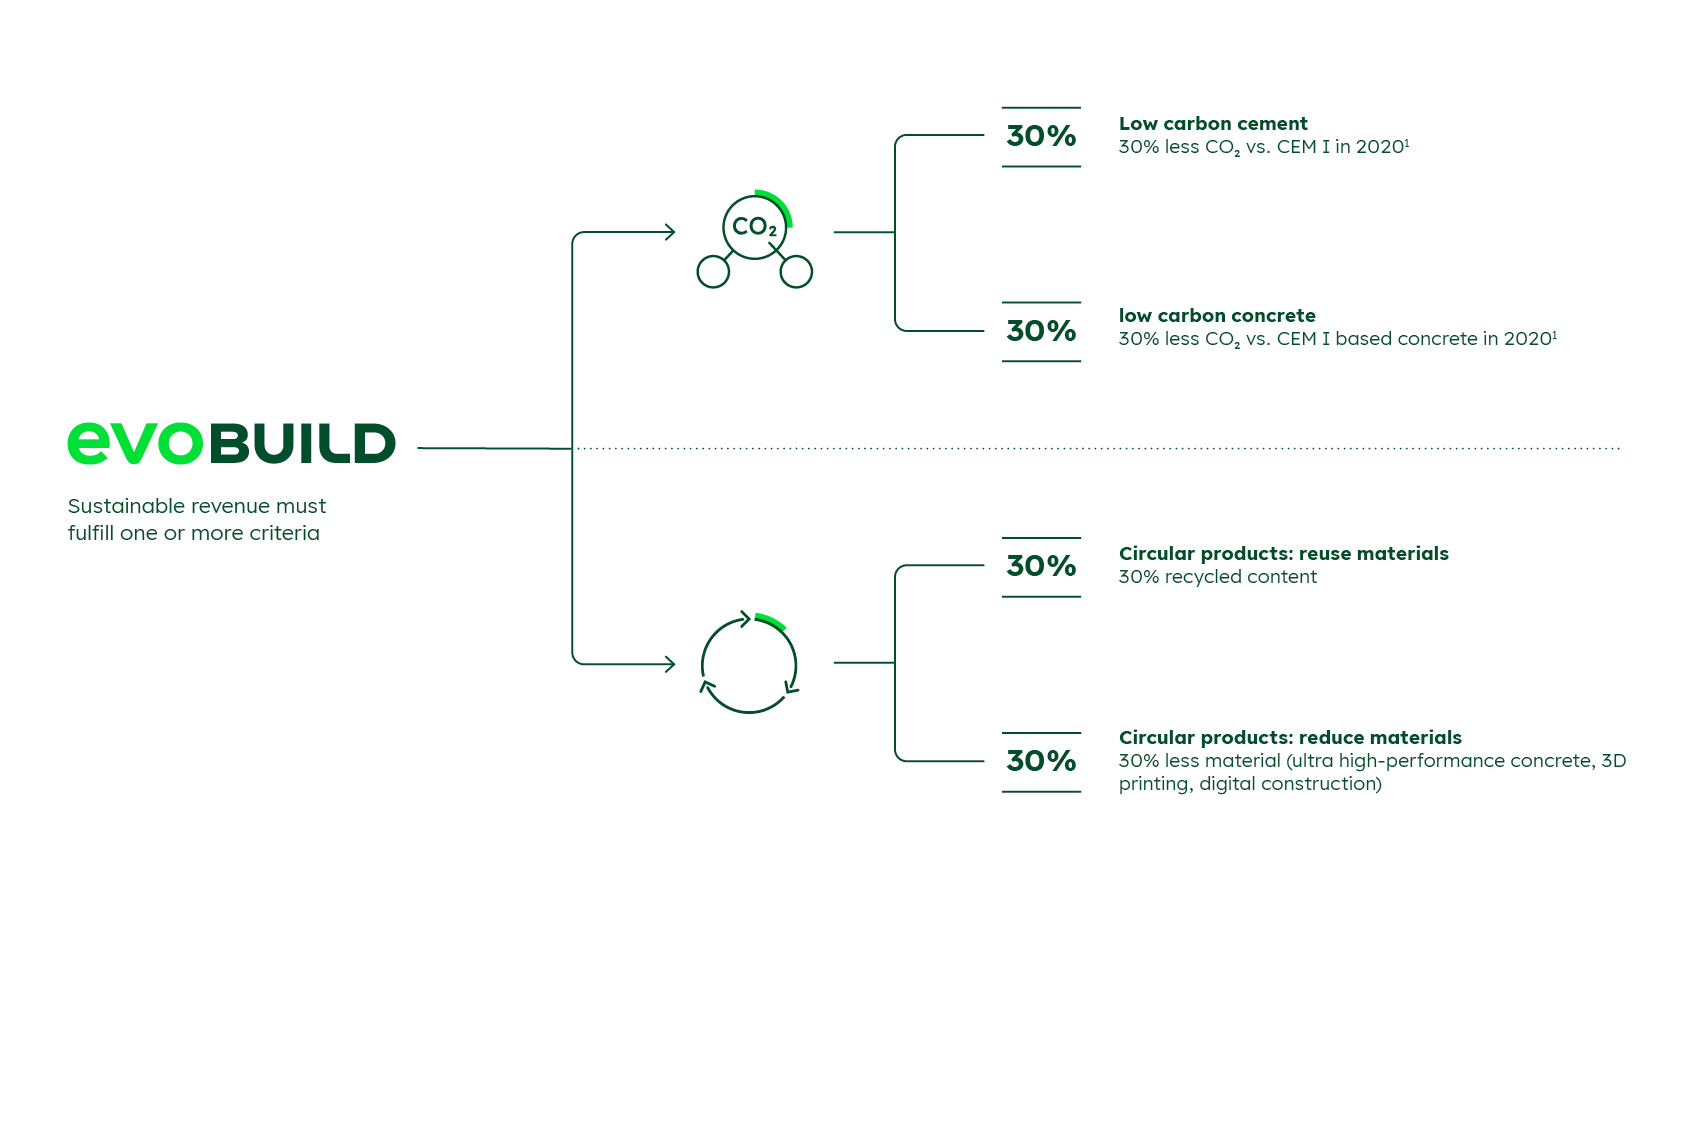 Infographic showing which criteria must be fulfilled for sustainable revenue: 30% less CO₂ or 30% recycled content